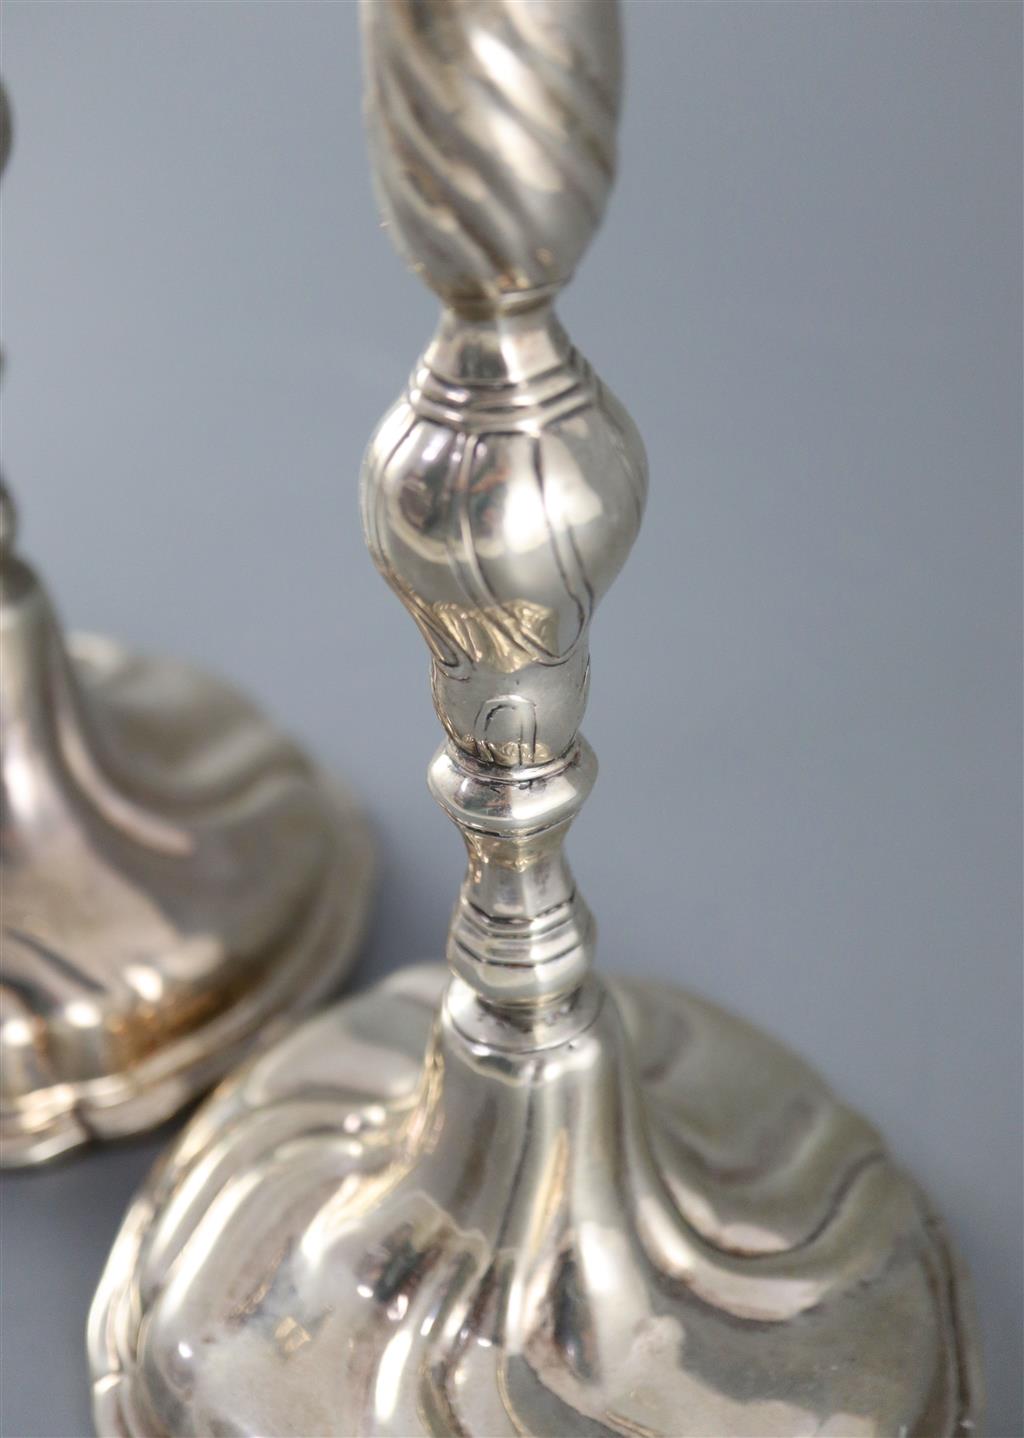 A pair of mid 18th century Danish silver candlesticks,